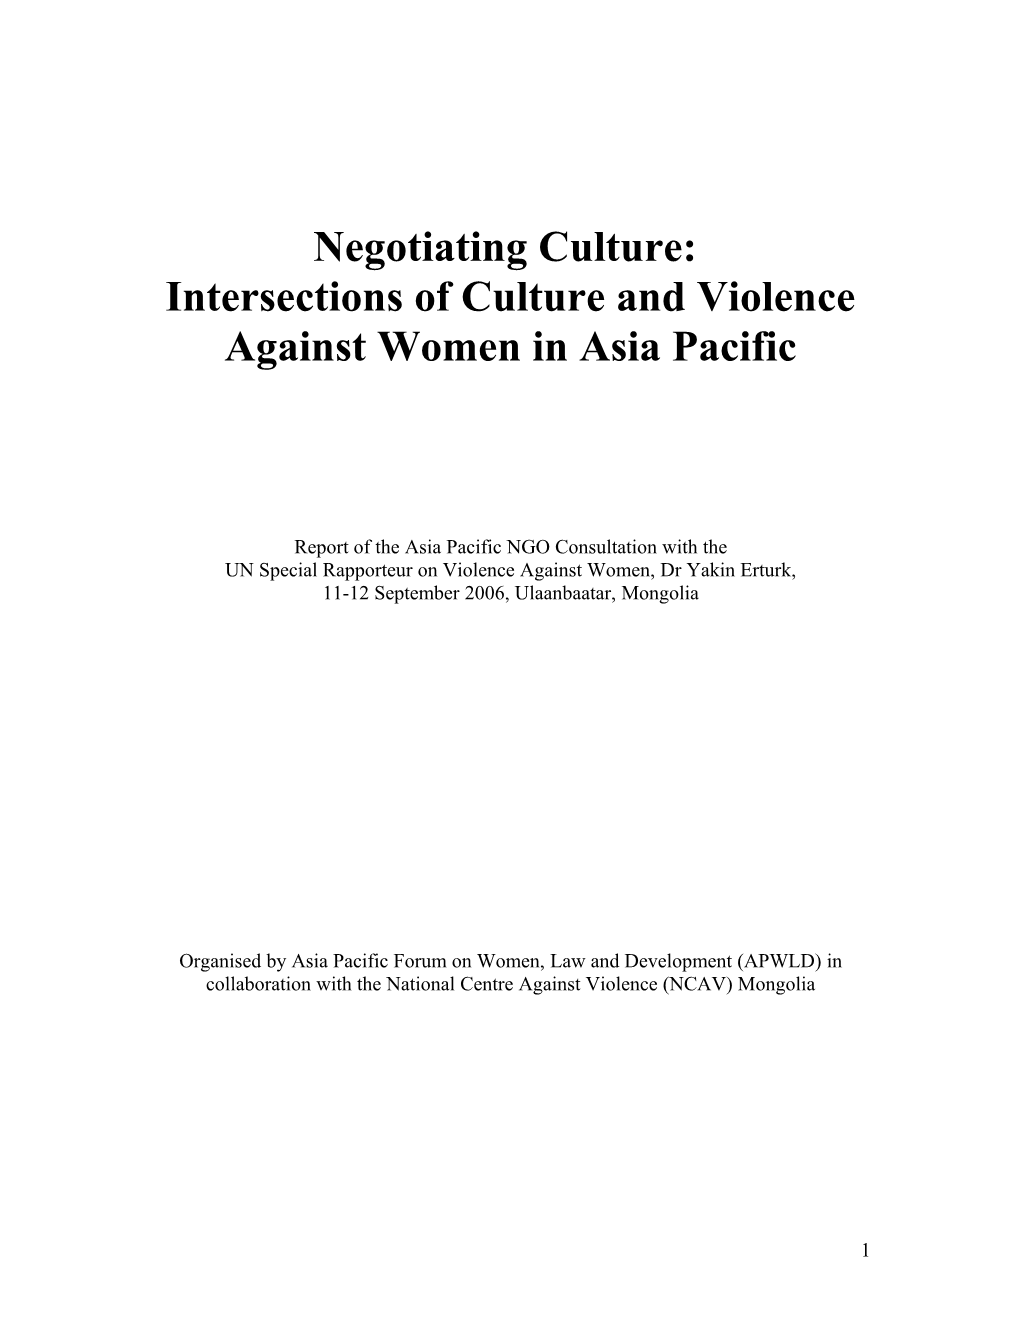 Intersections of Culture and Violence Against Women in Asia Pacific